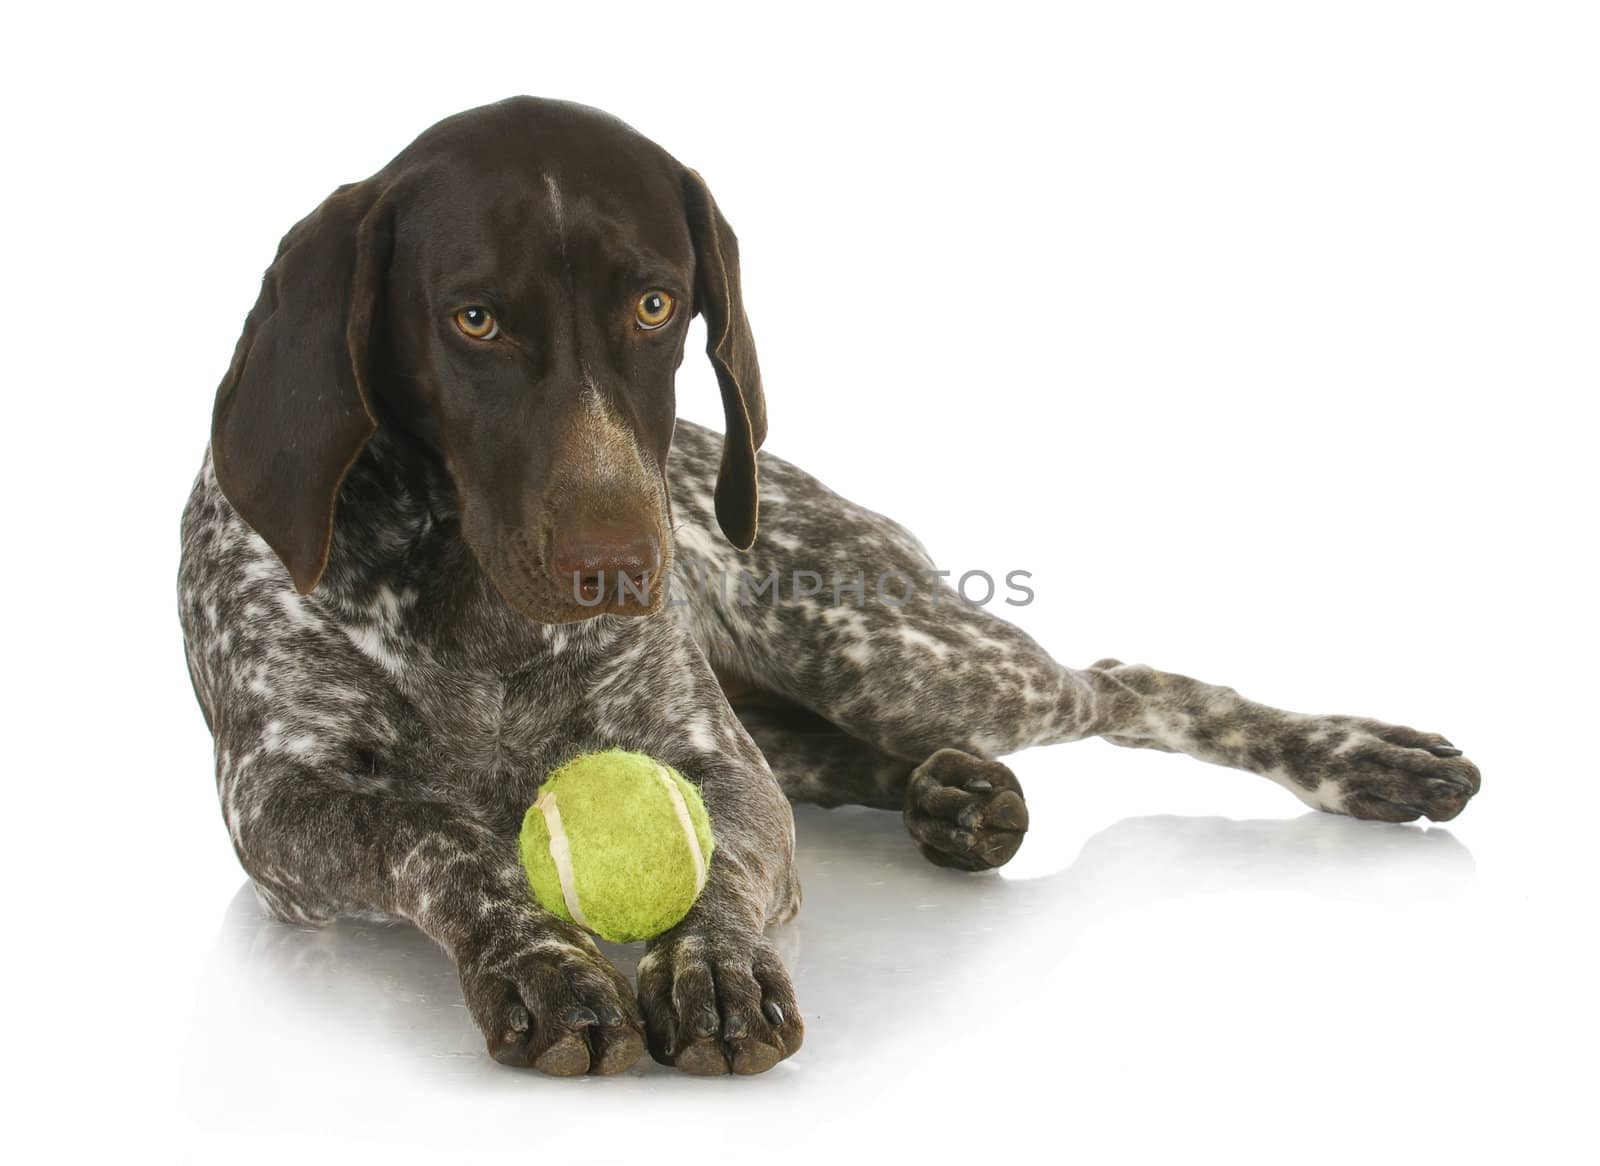 dog with a ball - german short haired pointer with a tennis ball between her paws - 4 months old